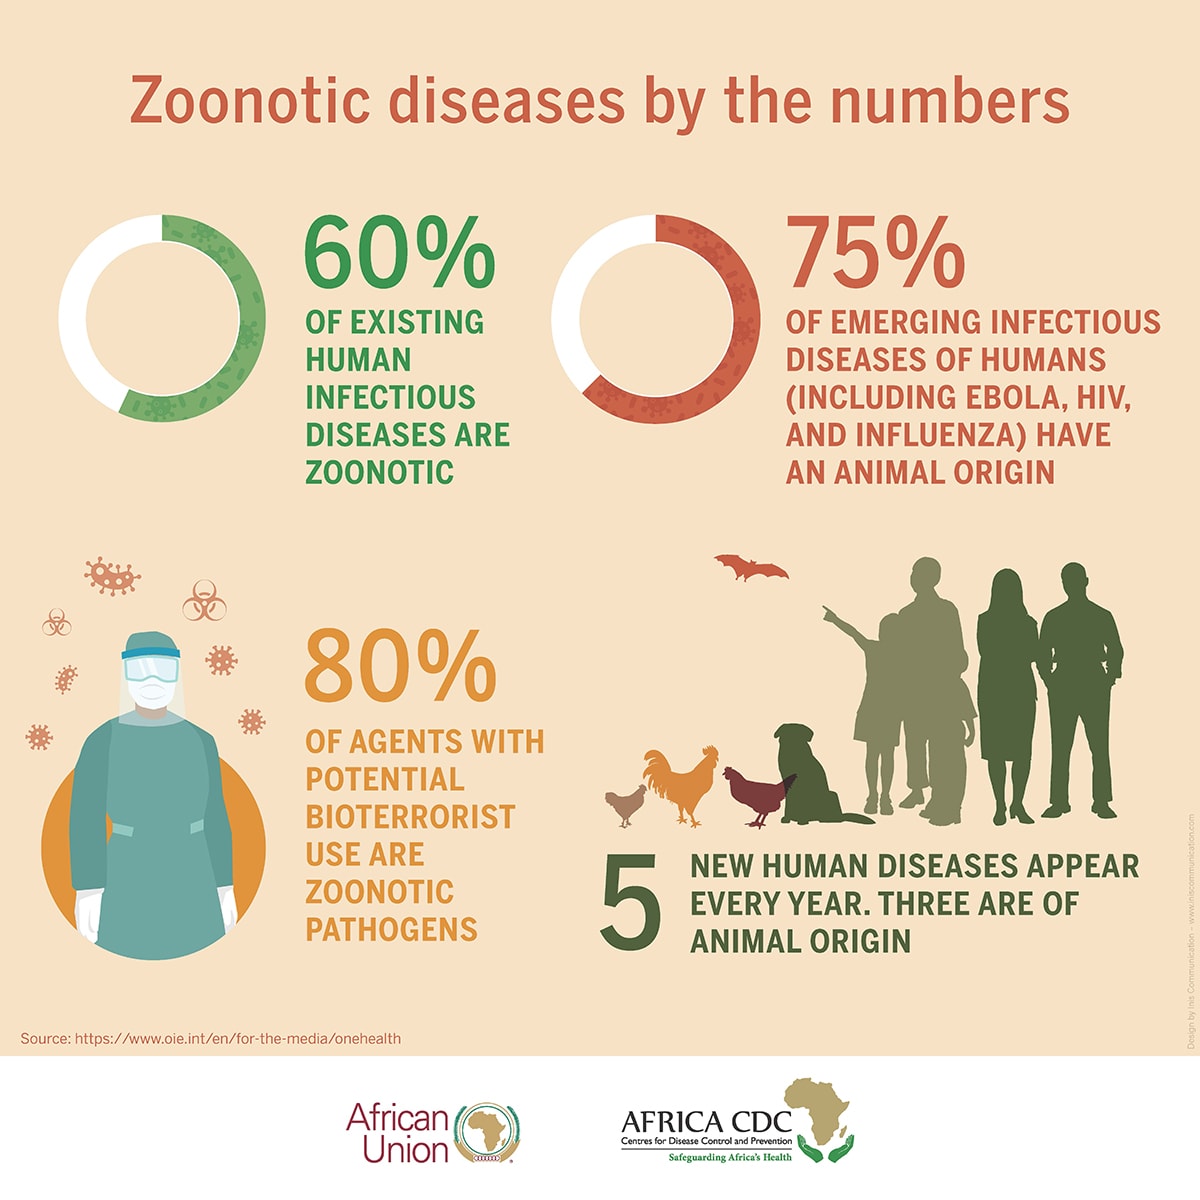 Zoonotic diseases by the numbers graphic from African Union and Africa CDC